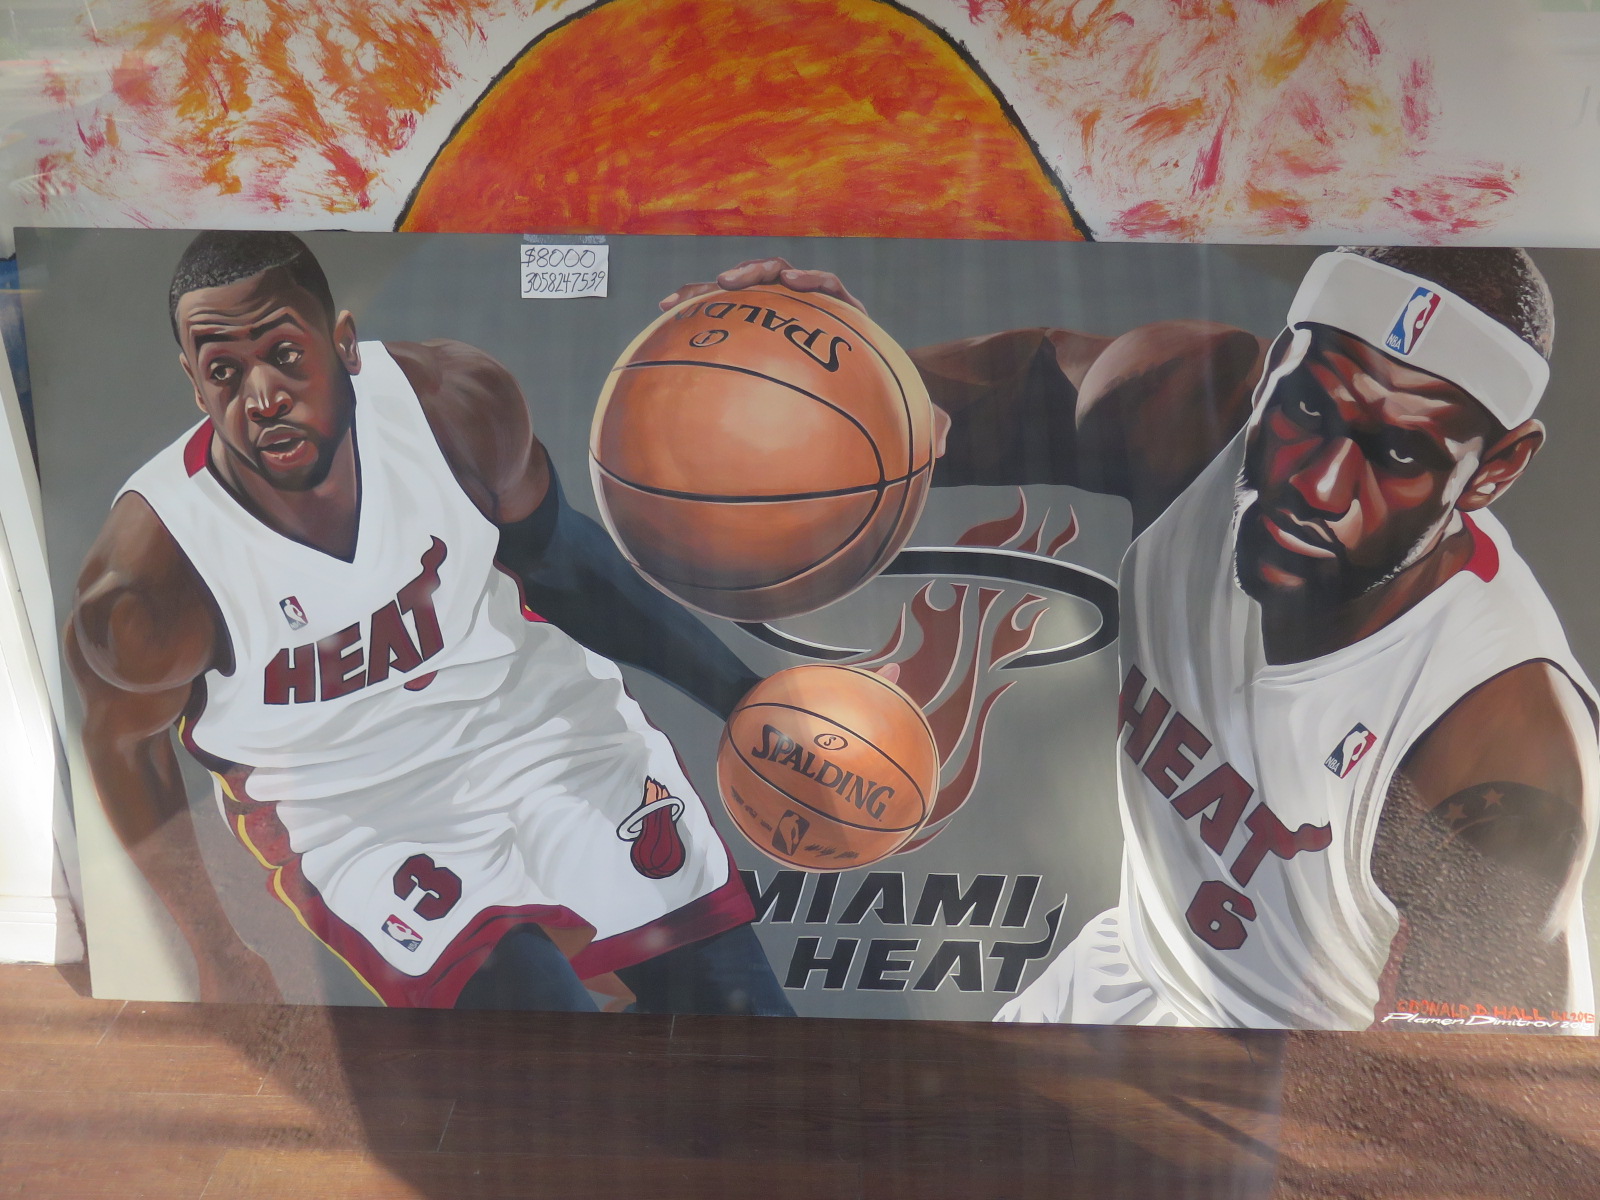 Miami painting for sale $8000 price tag